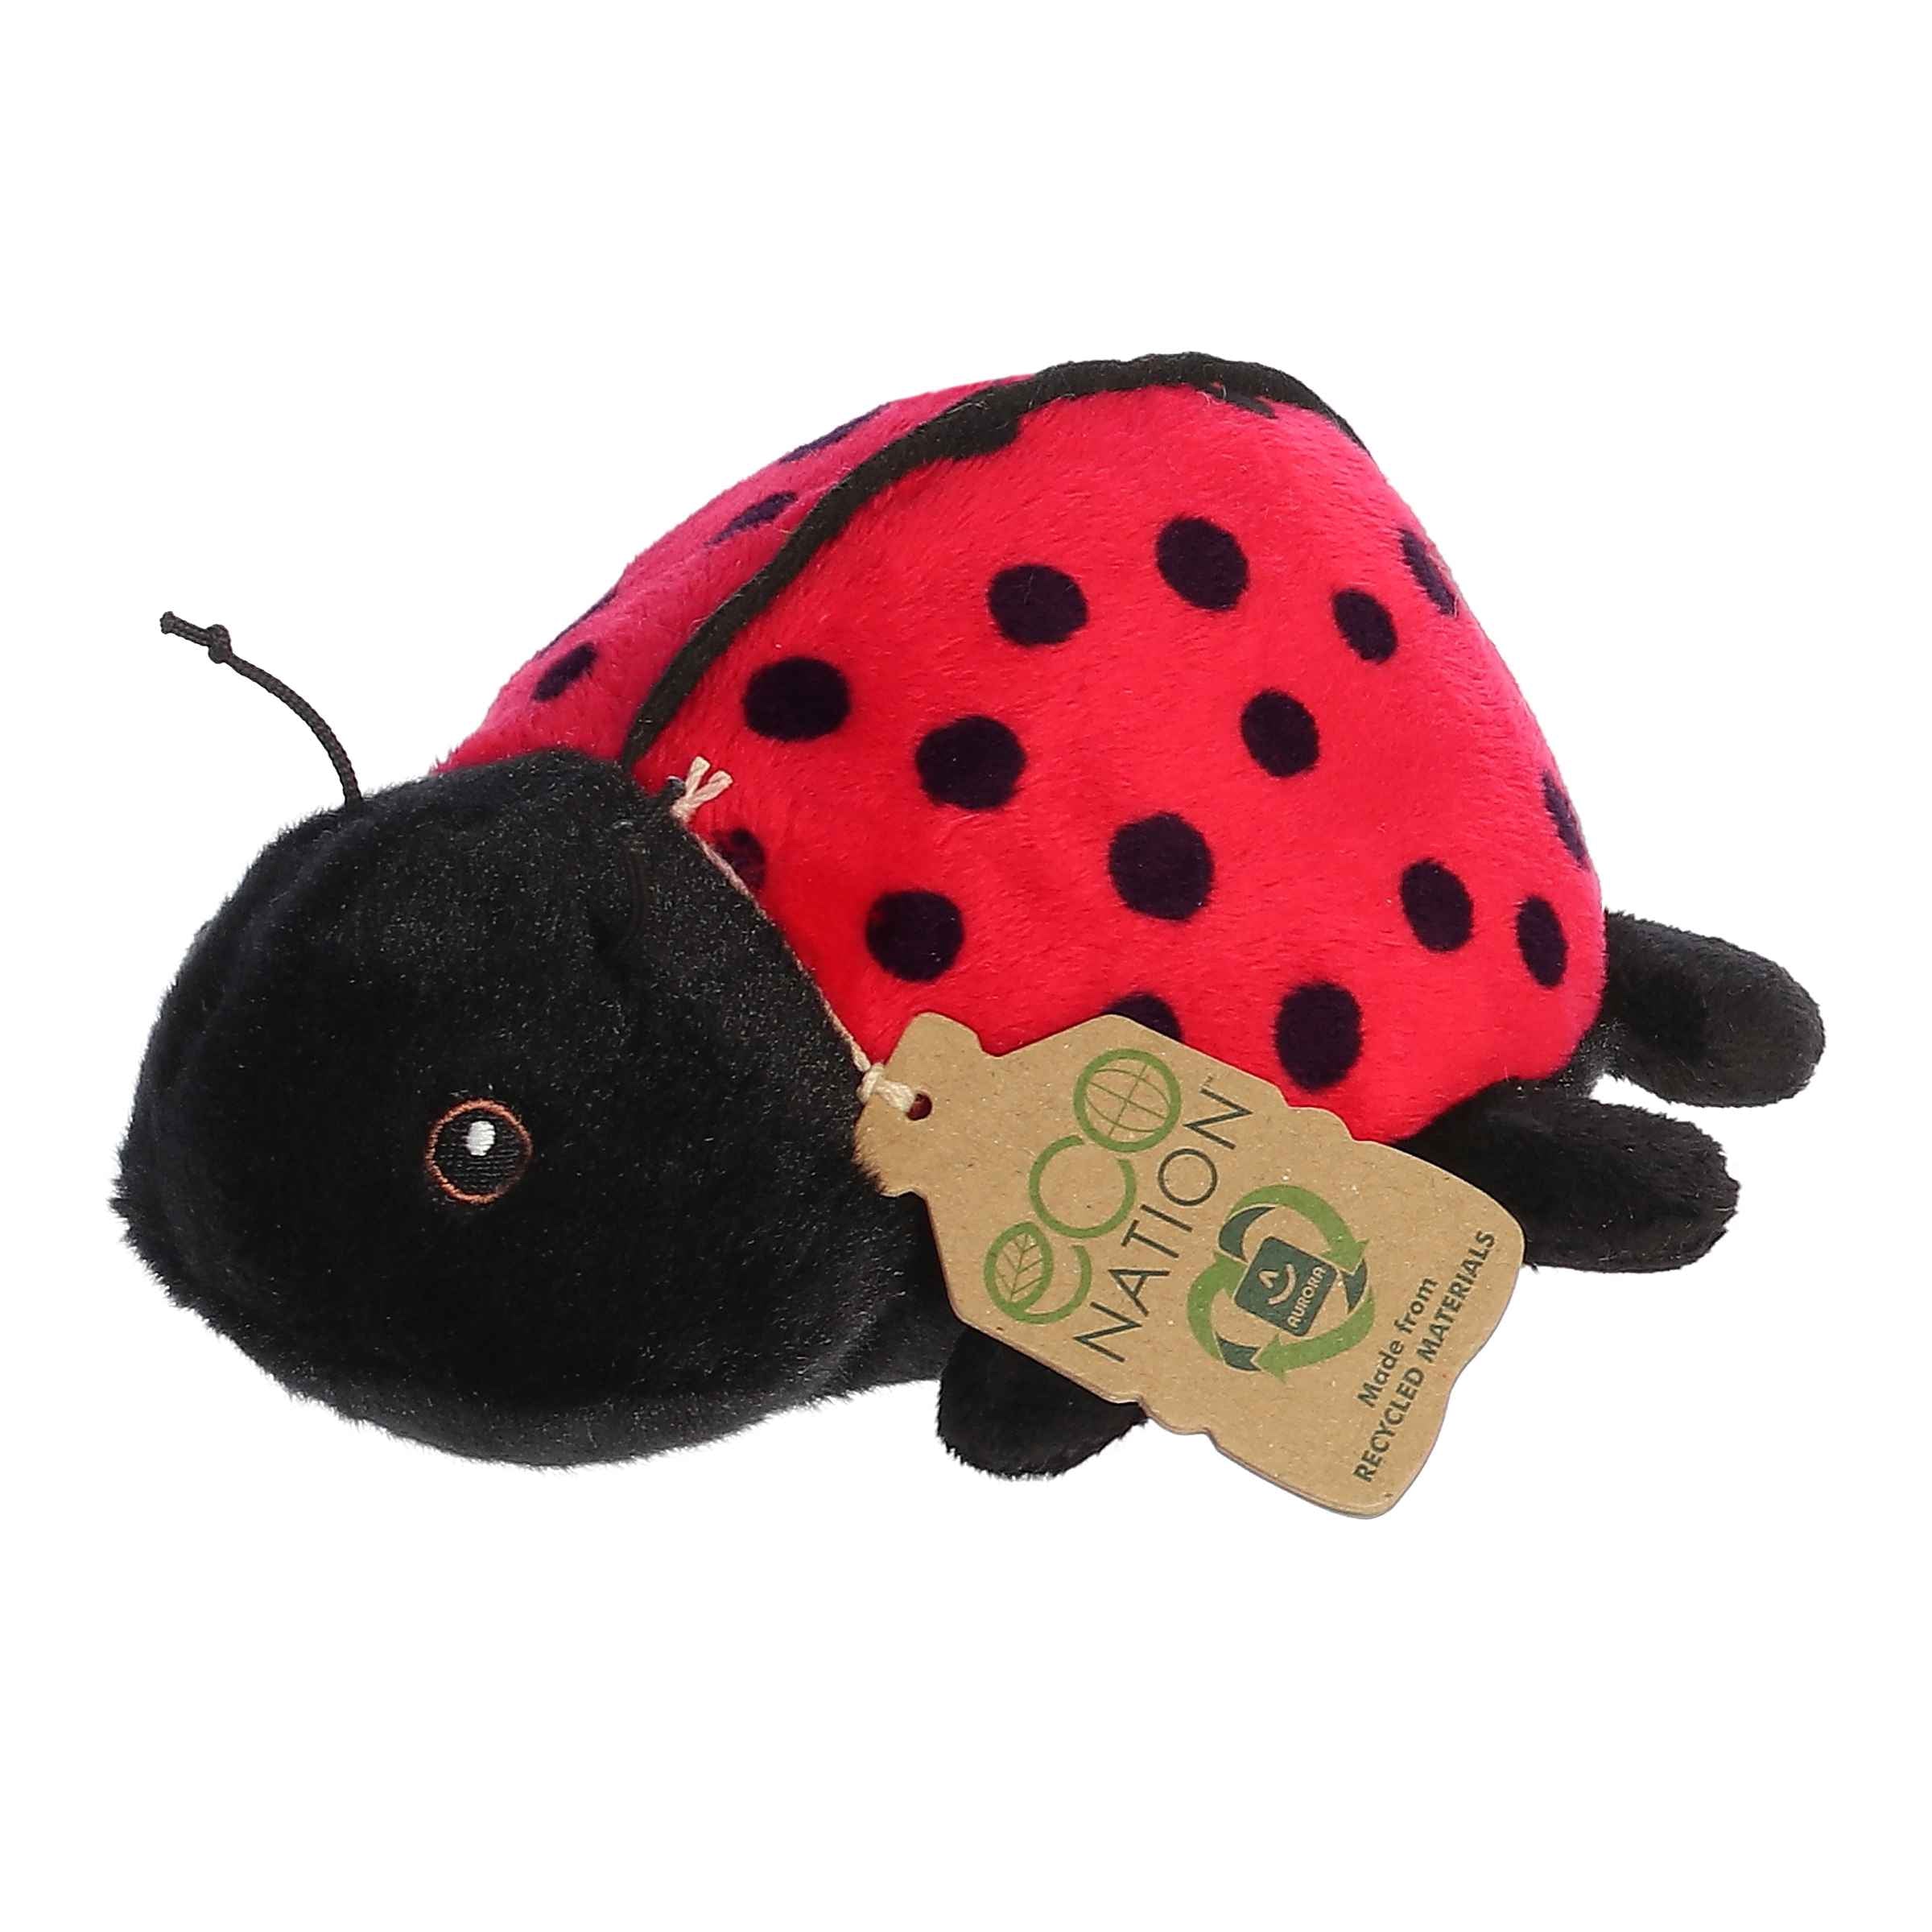 8'' Ladybug plush from Eco Softies, vibrant and soft, made from recycled materials.